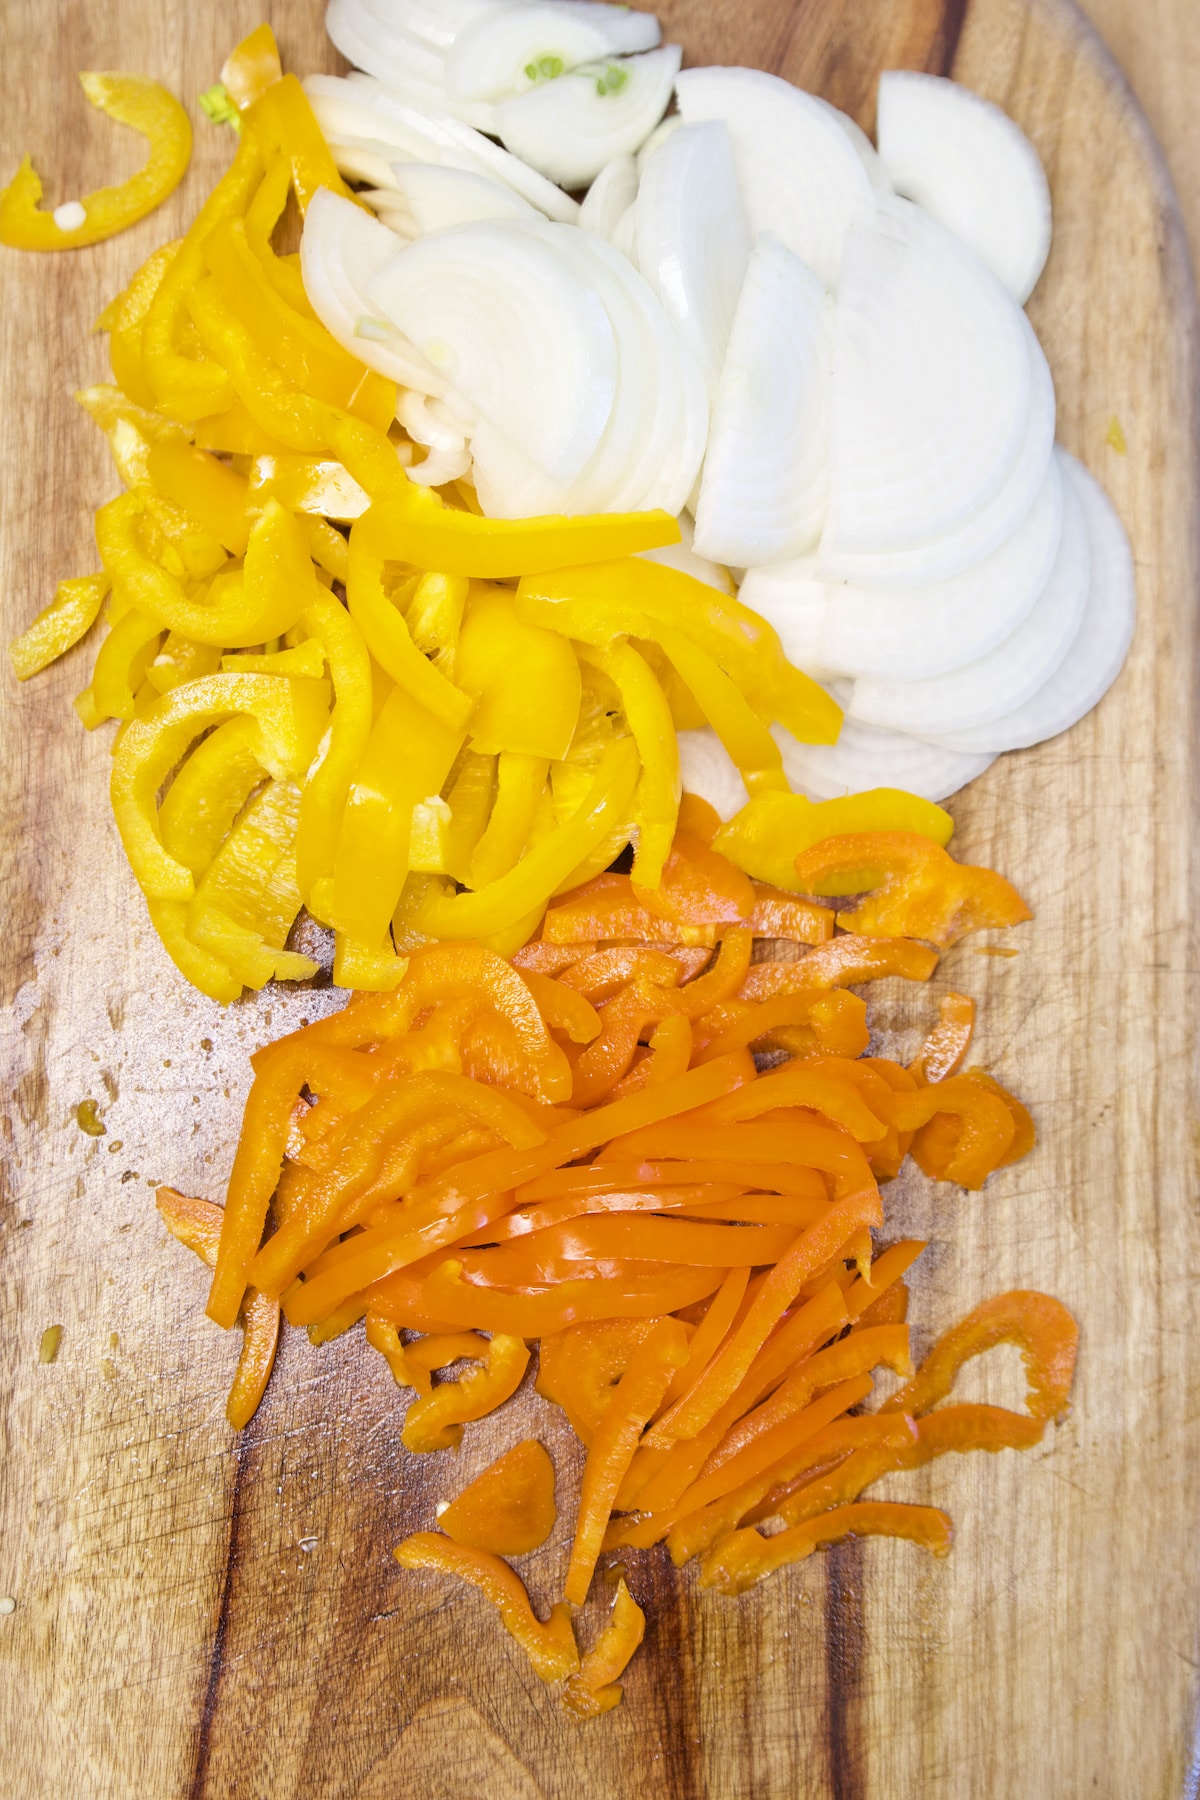 Sliced onions, yellow and orange bell peppers.